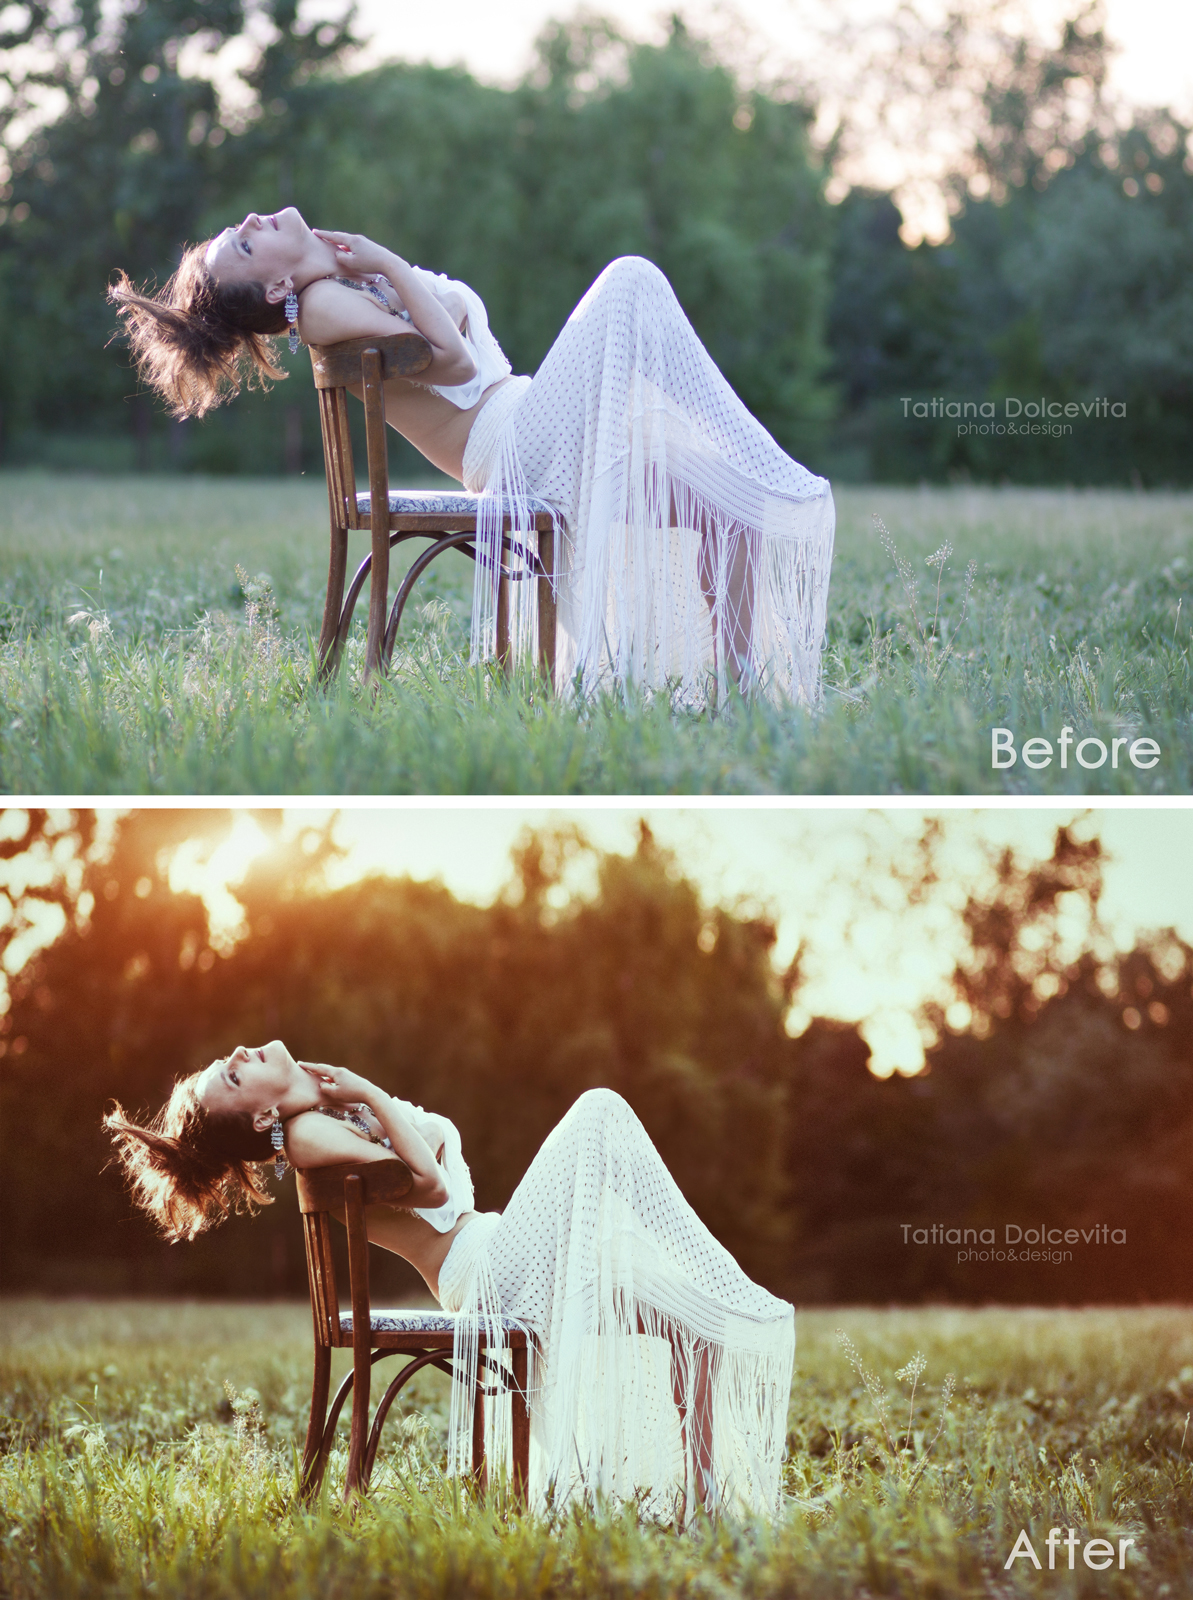 BEFORE AND AFTER-ДО И ПОСЛЕ